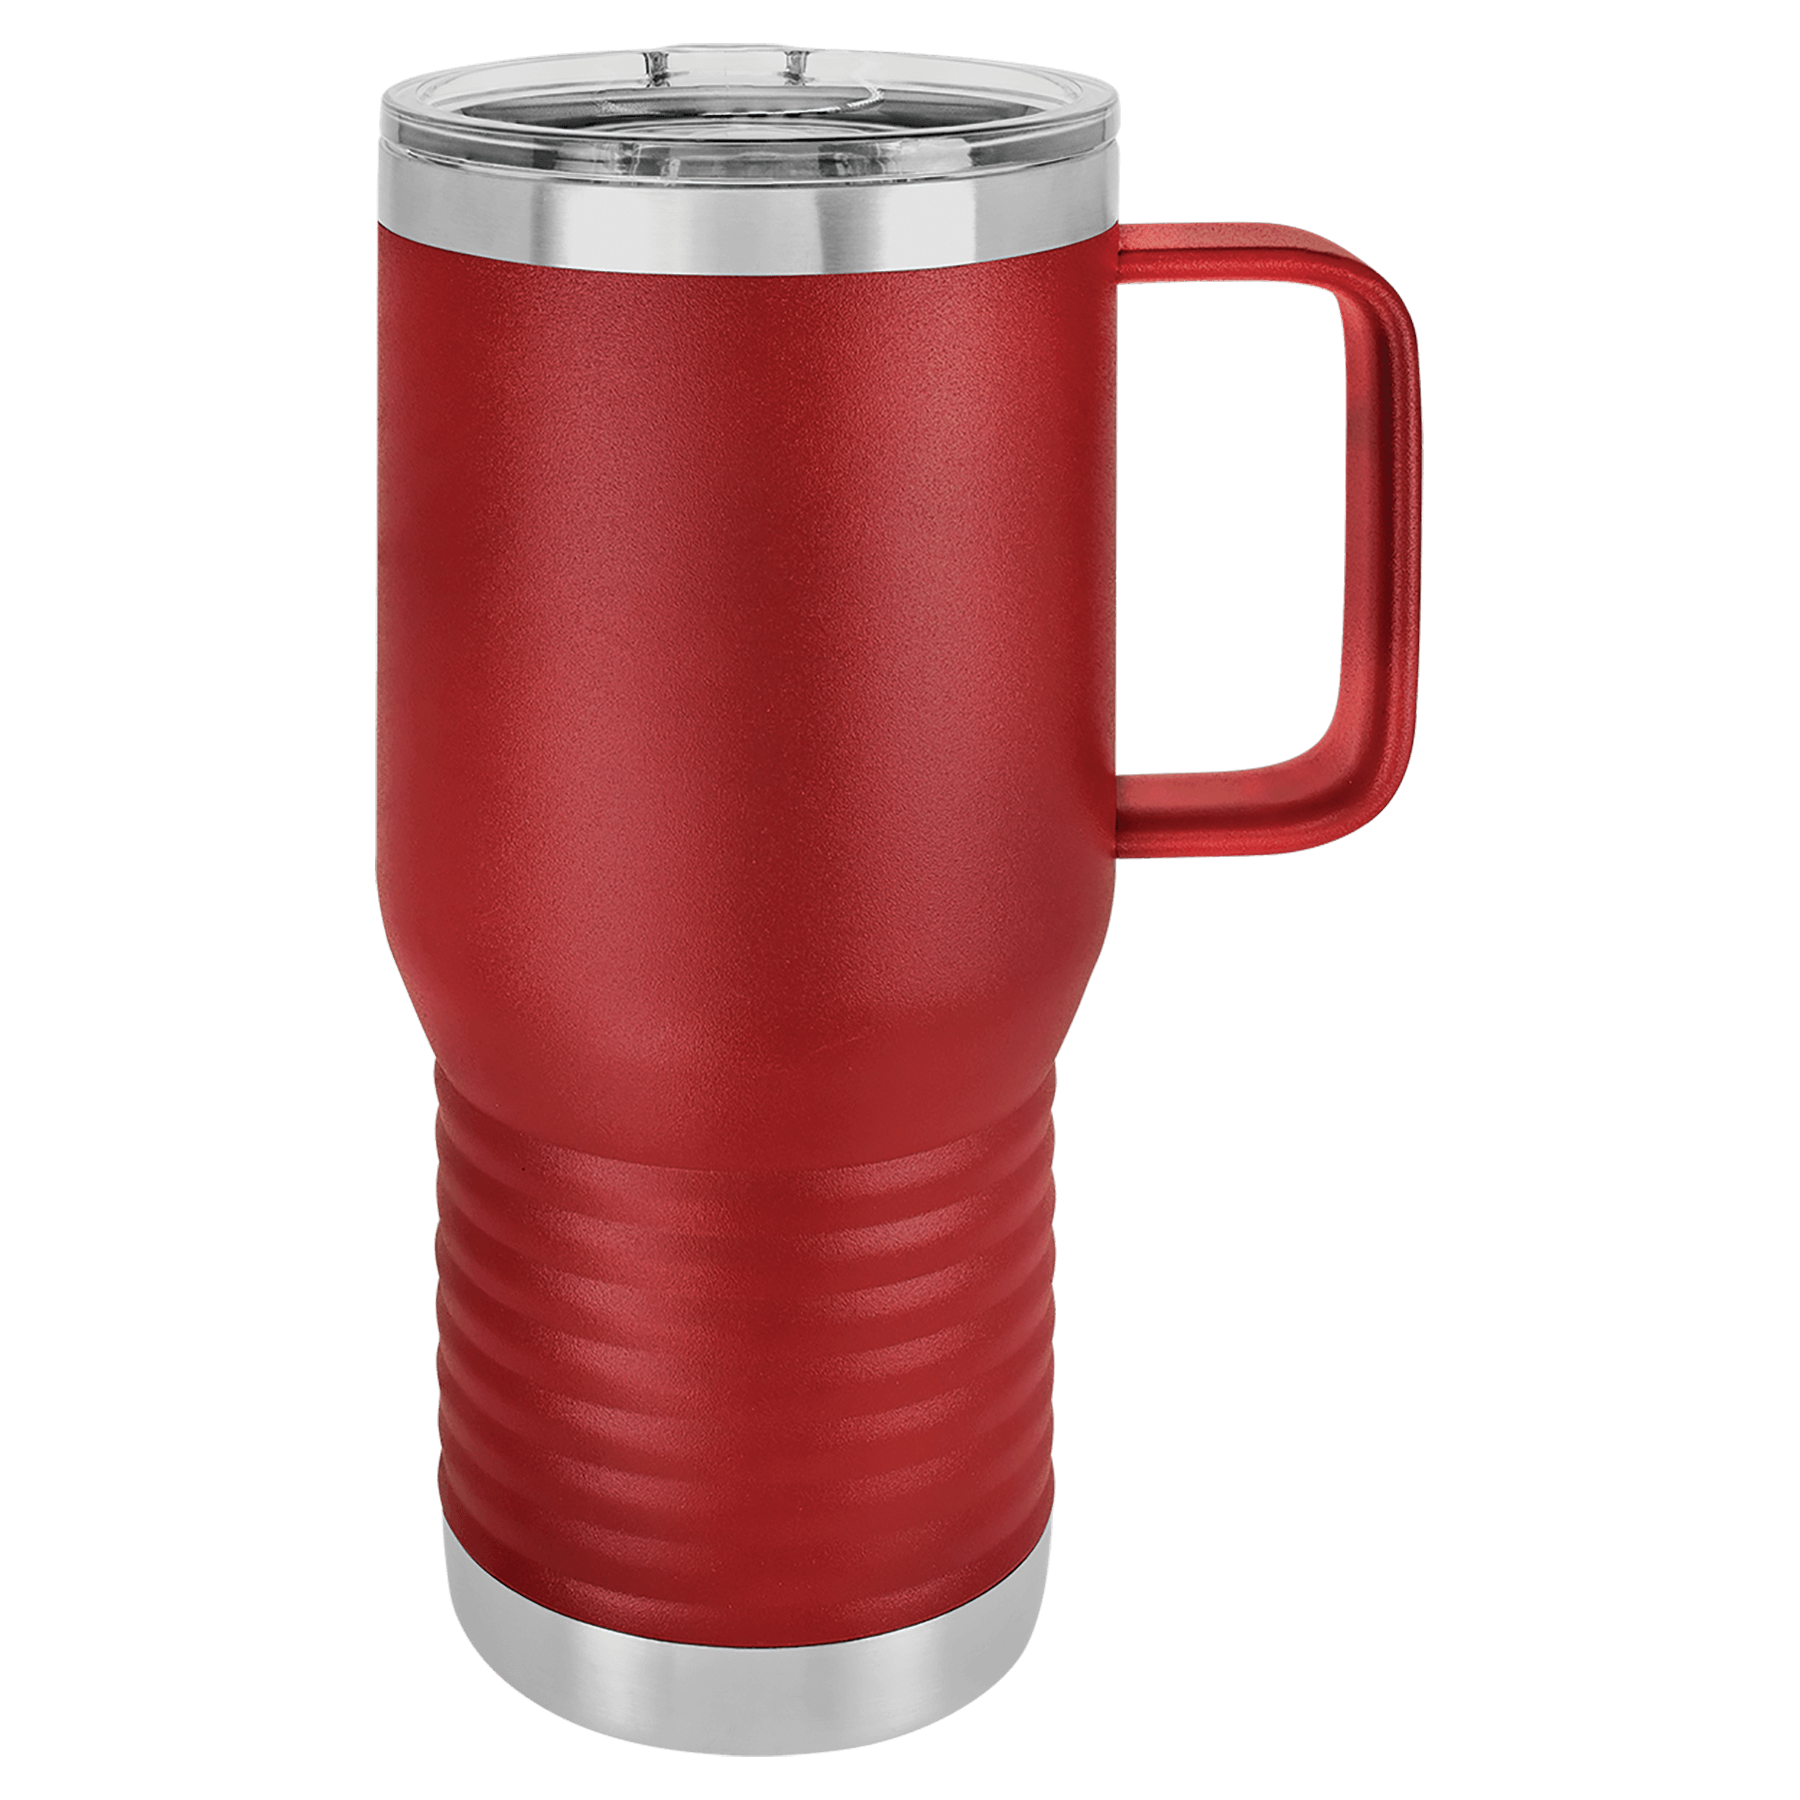 20 oz. Stainless Steel & Powder Coated Travel Mugs with Lid - The Luua Company